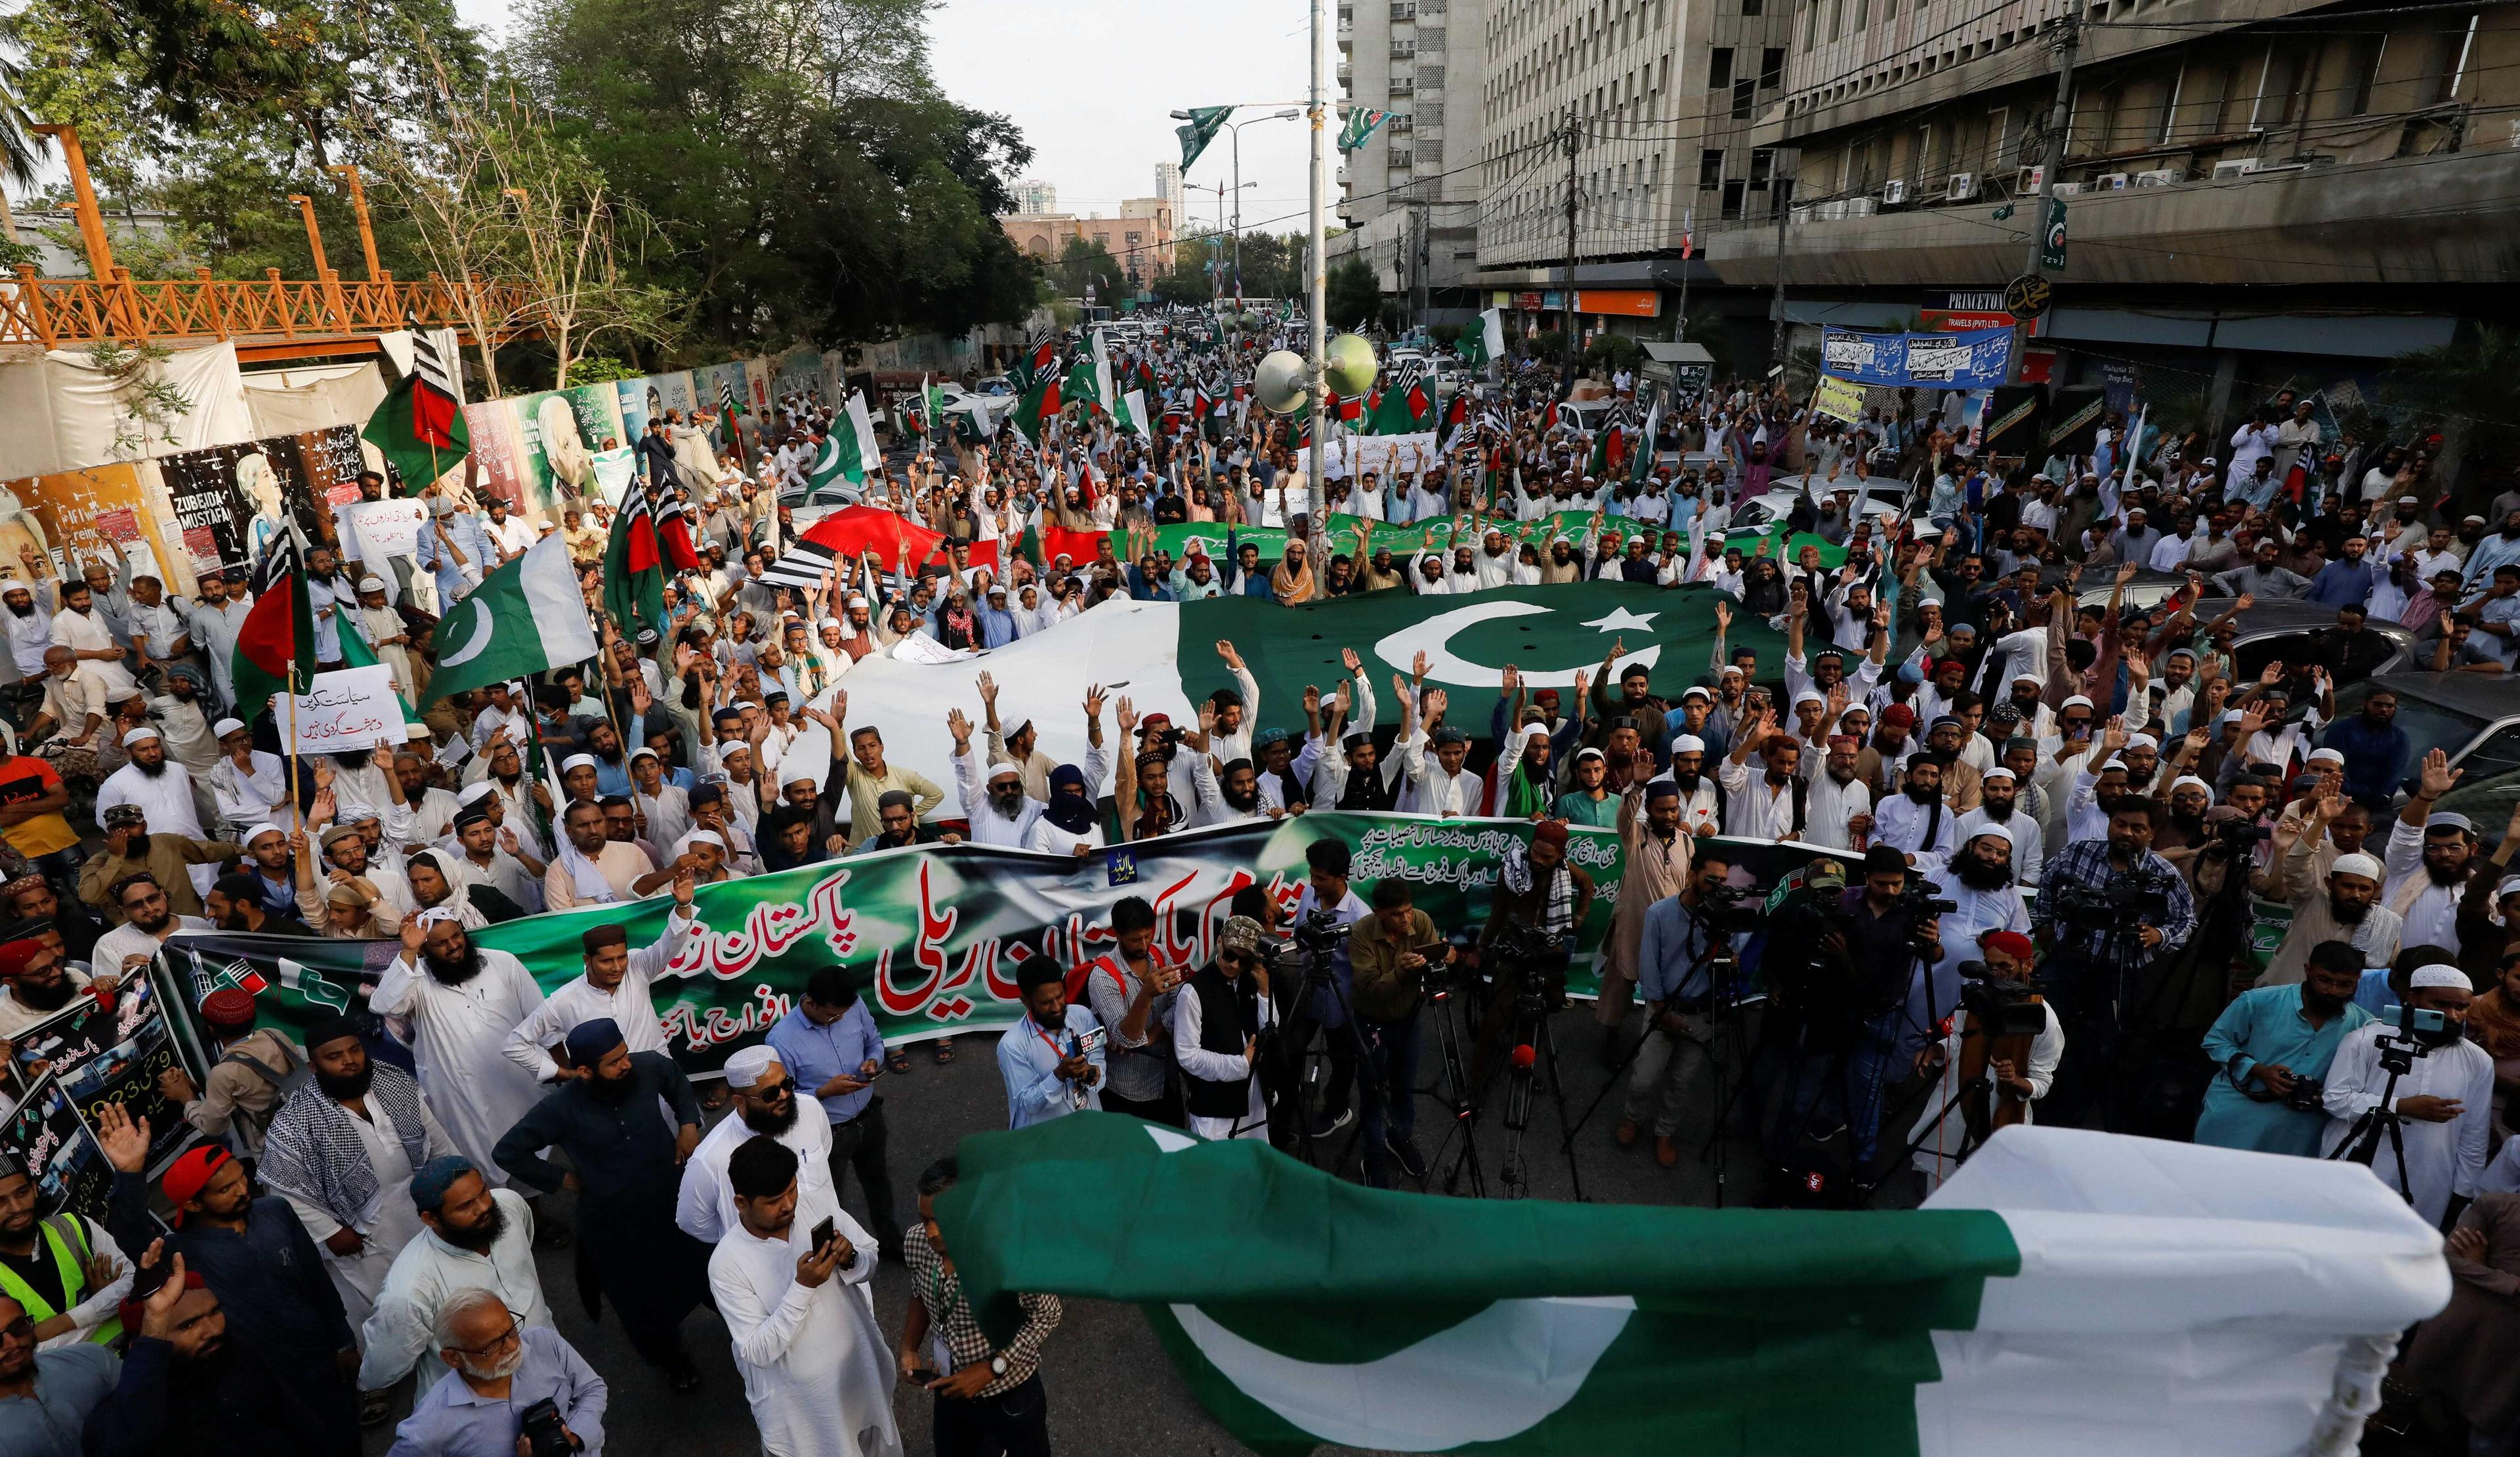 Supporters carry flags in support of the Pakistan's Armed Forces, and condemn the attacks on government and army buildings by the supporters of Pakistan's former prime minister Imran Khan on May 9, during a rally in Karachi, Pakistan May 19. Photo: Reuters